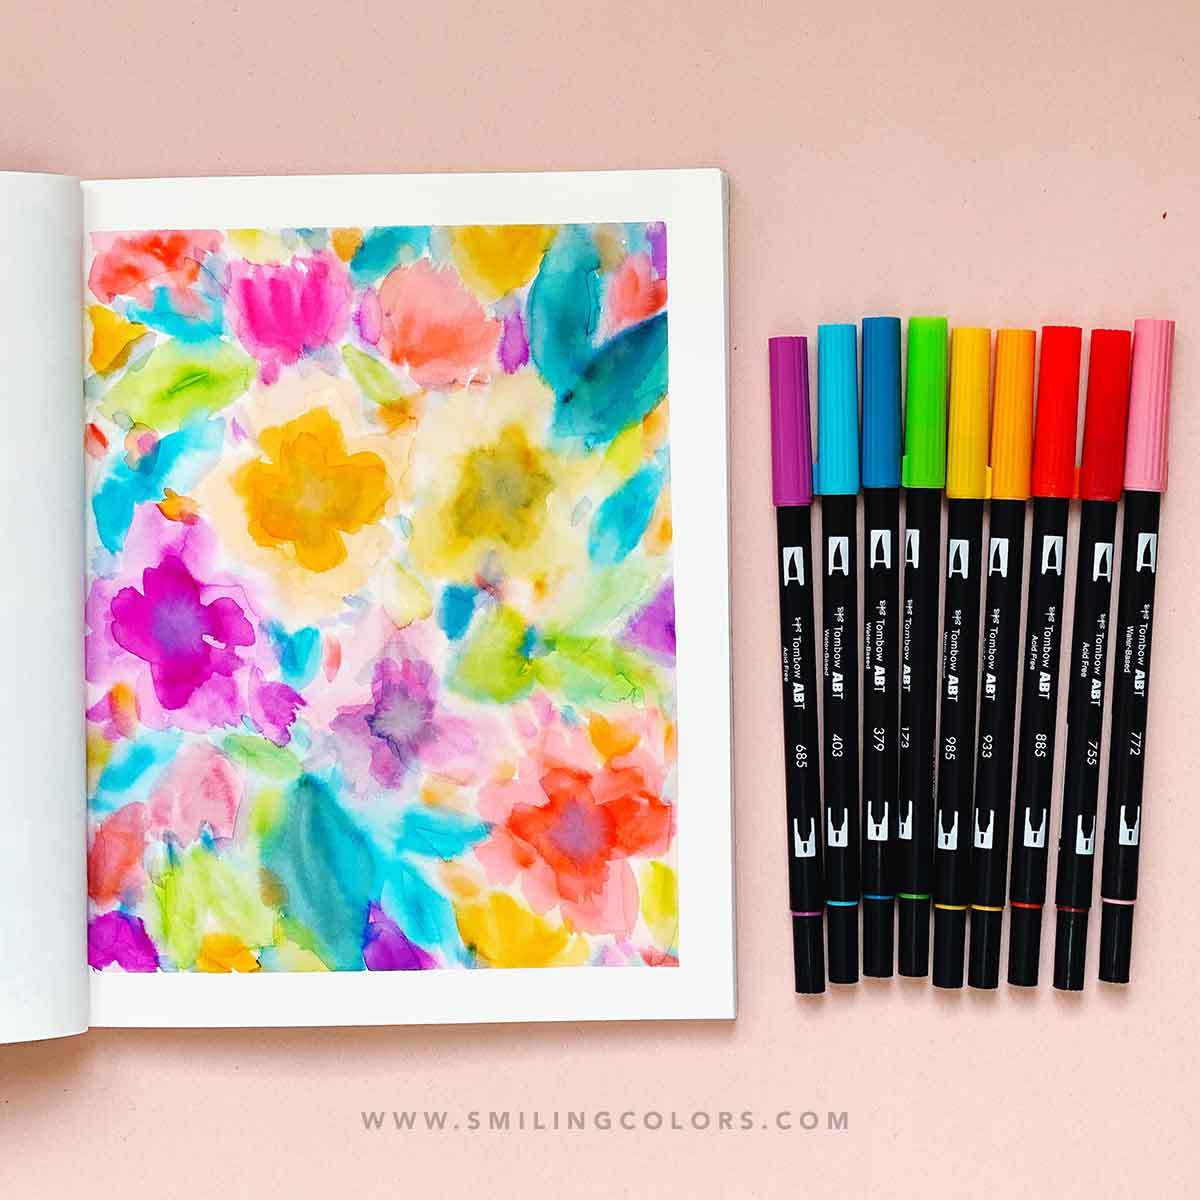 Messy floral painting: Video